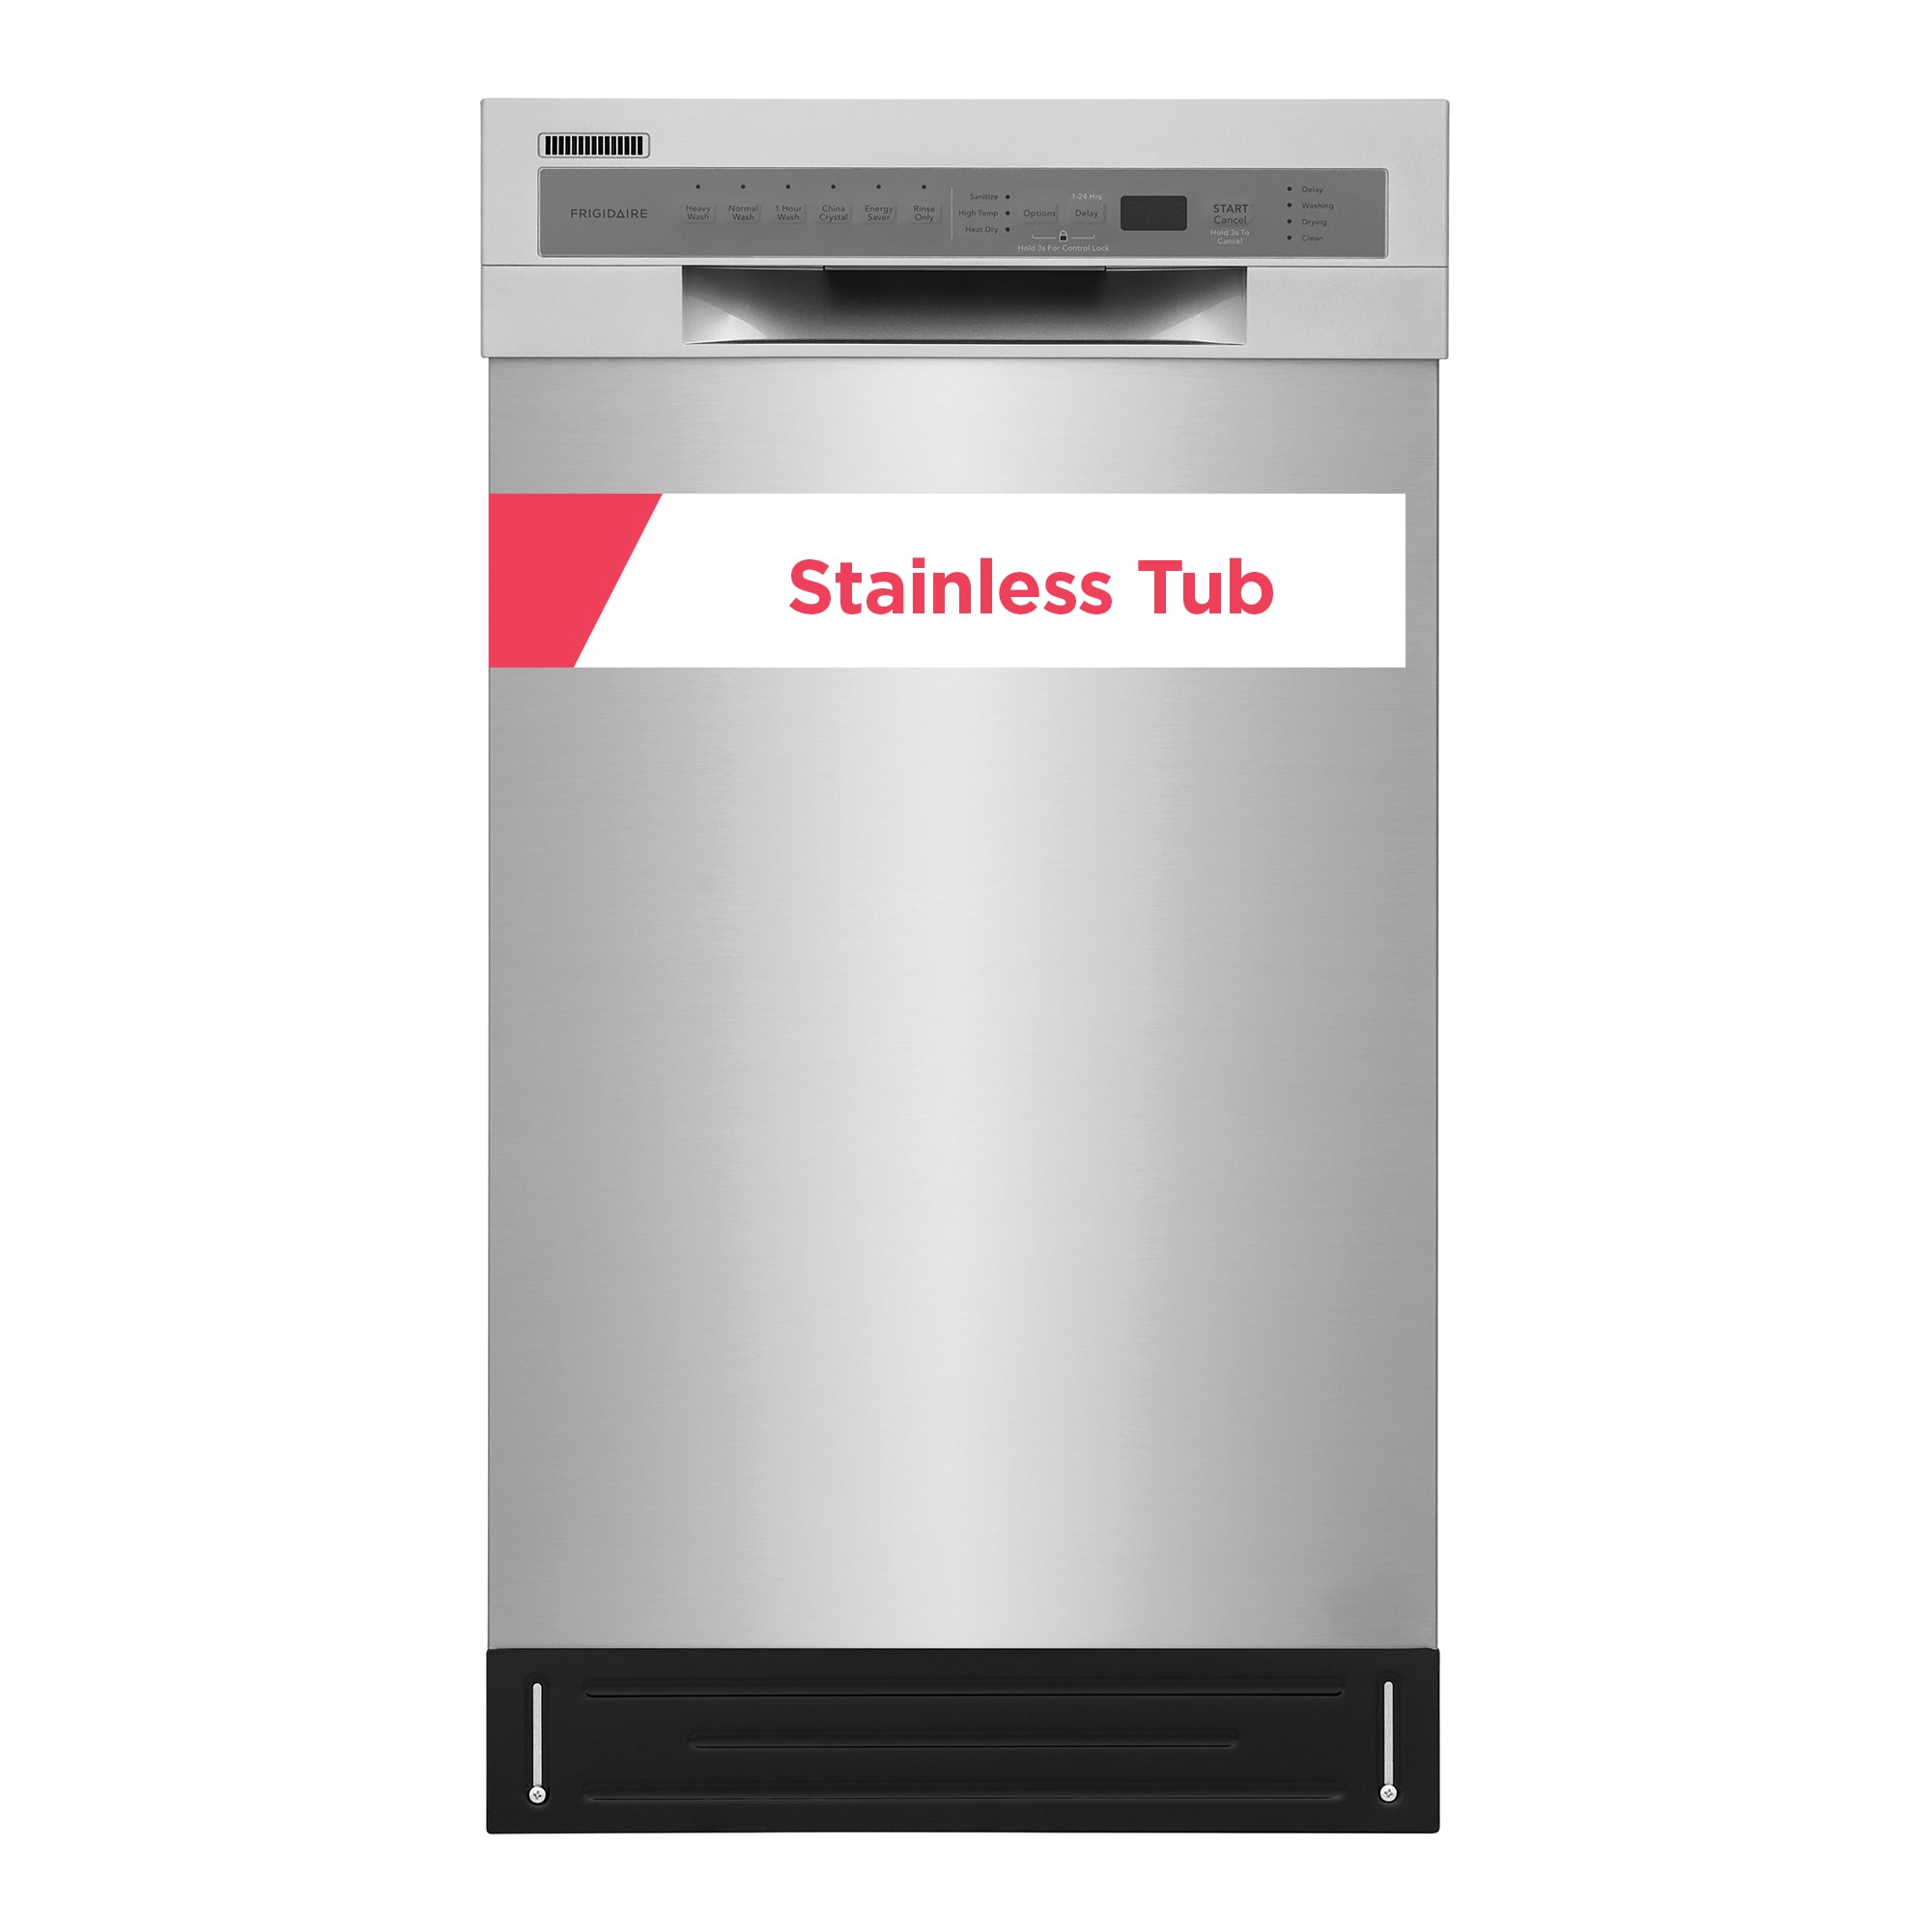 Frigidaire Stainless Steel Tub Front Control 18-in Built-In Dishwasher  (Stainless Steel) ENERGY STAR, 52-dBA in the Built-In Dishwashers  department at